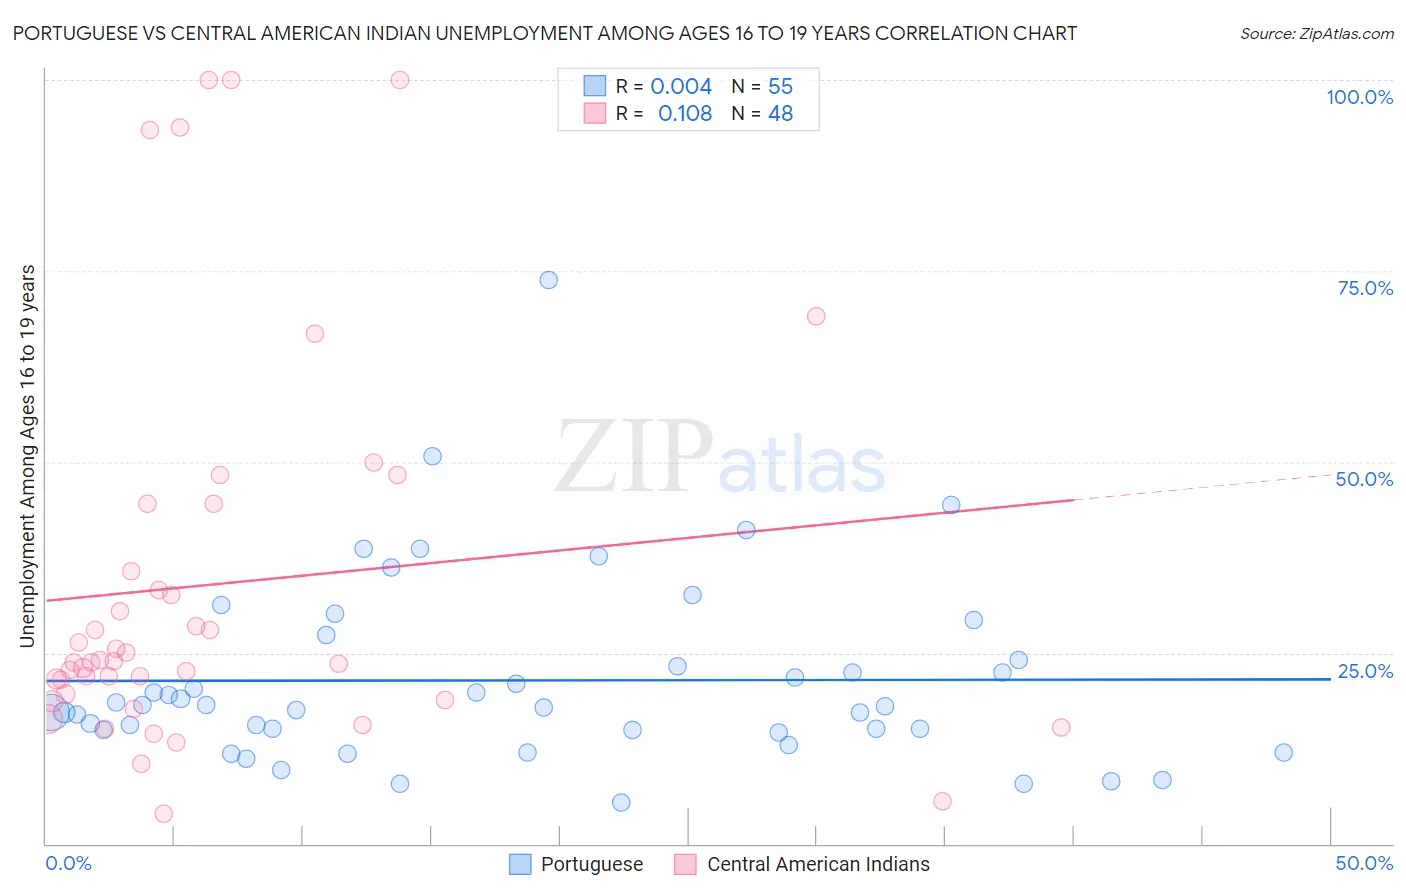 Portuguese vs Central American Indian Unemployment Among Ages 16 to 19 years